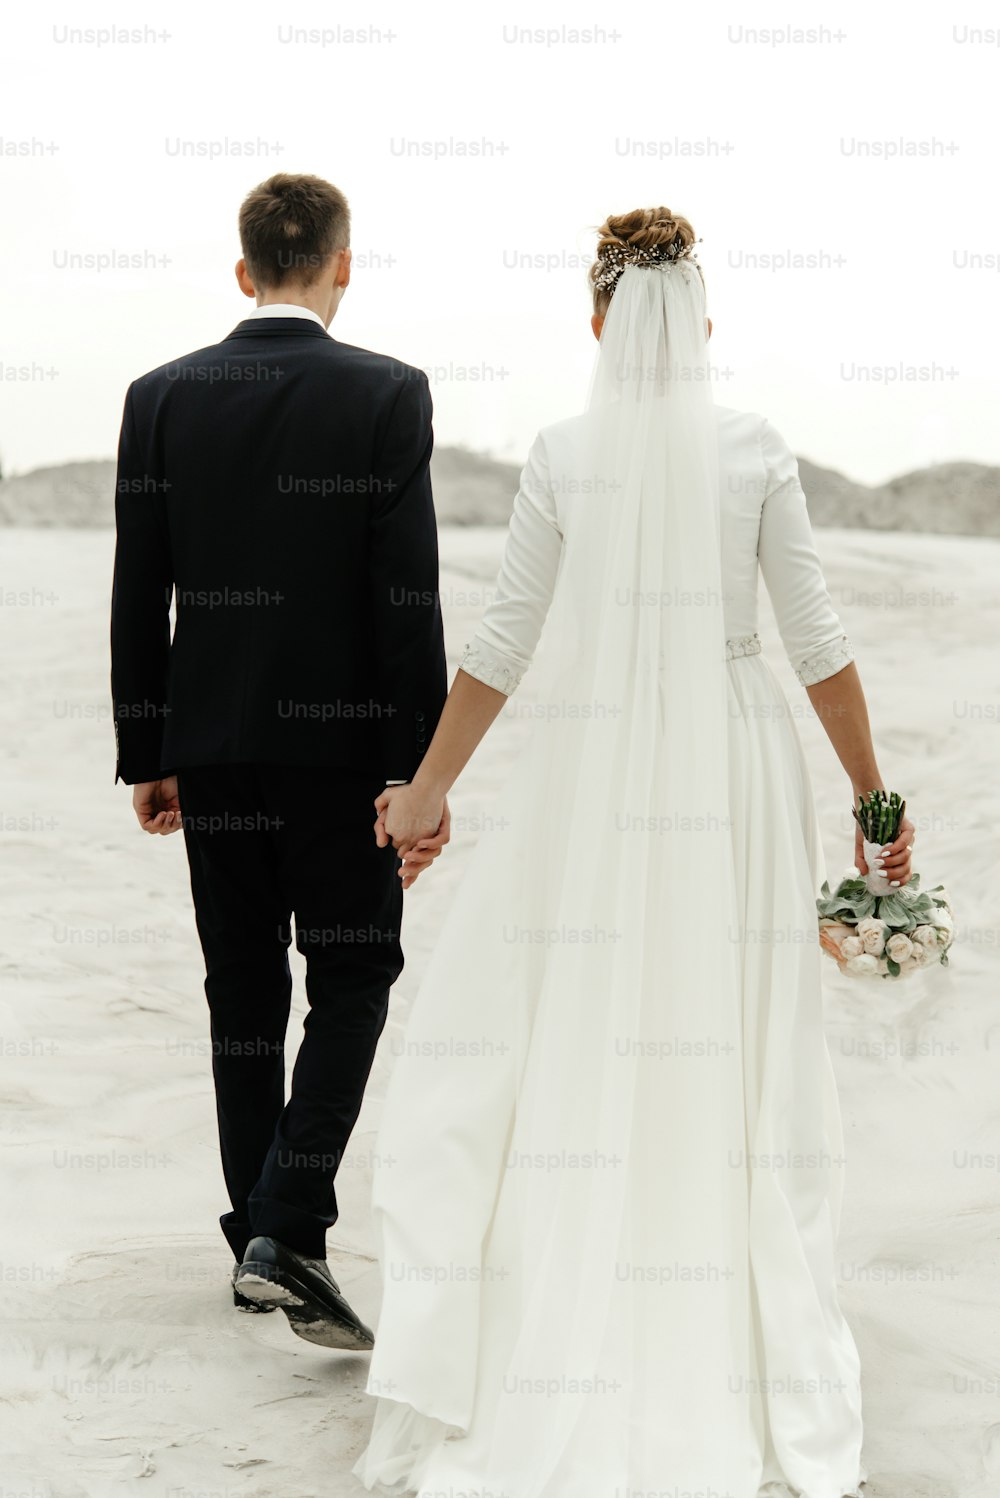 gorgeous bride and groom walking holding hands and looking ar each other at sandy beach lake, true emotions